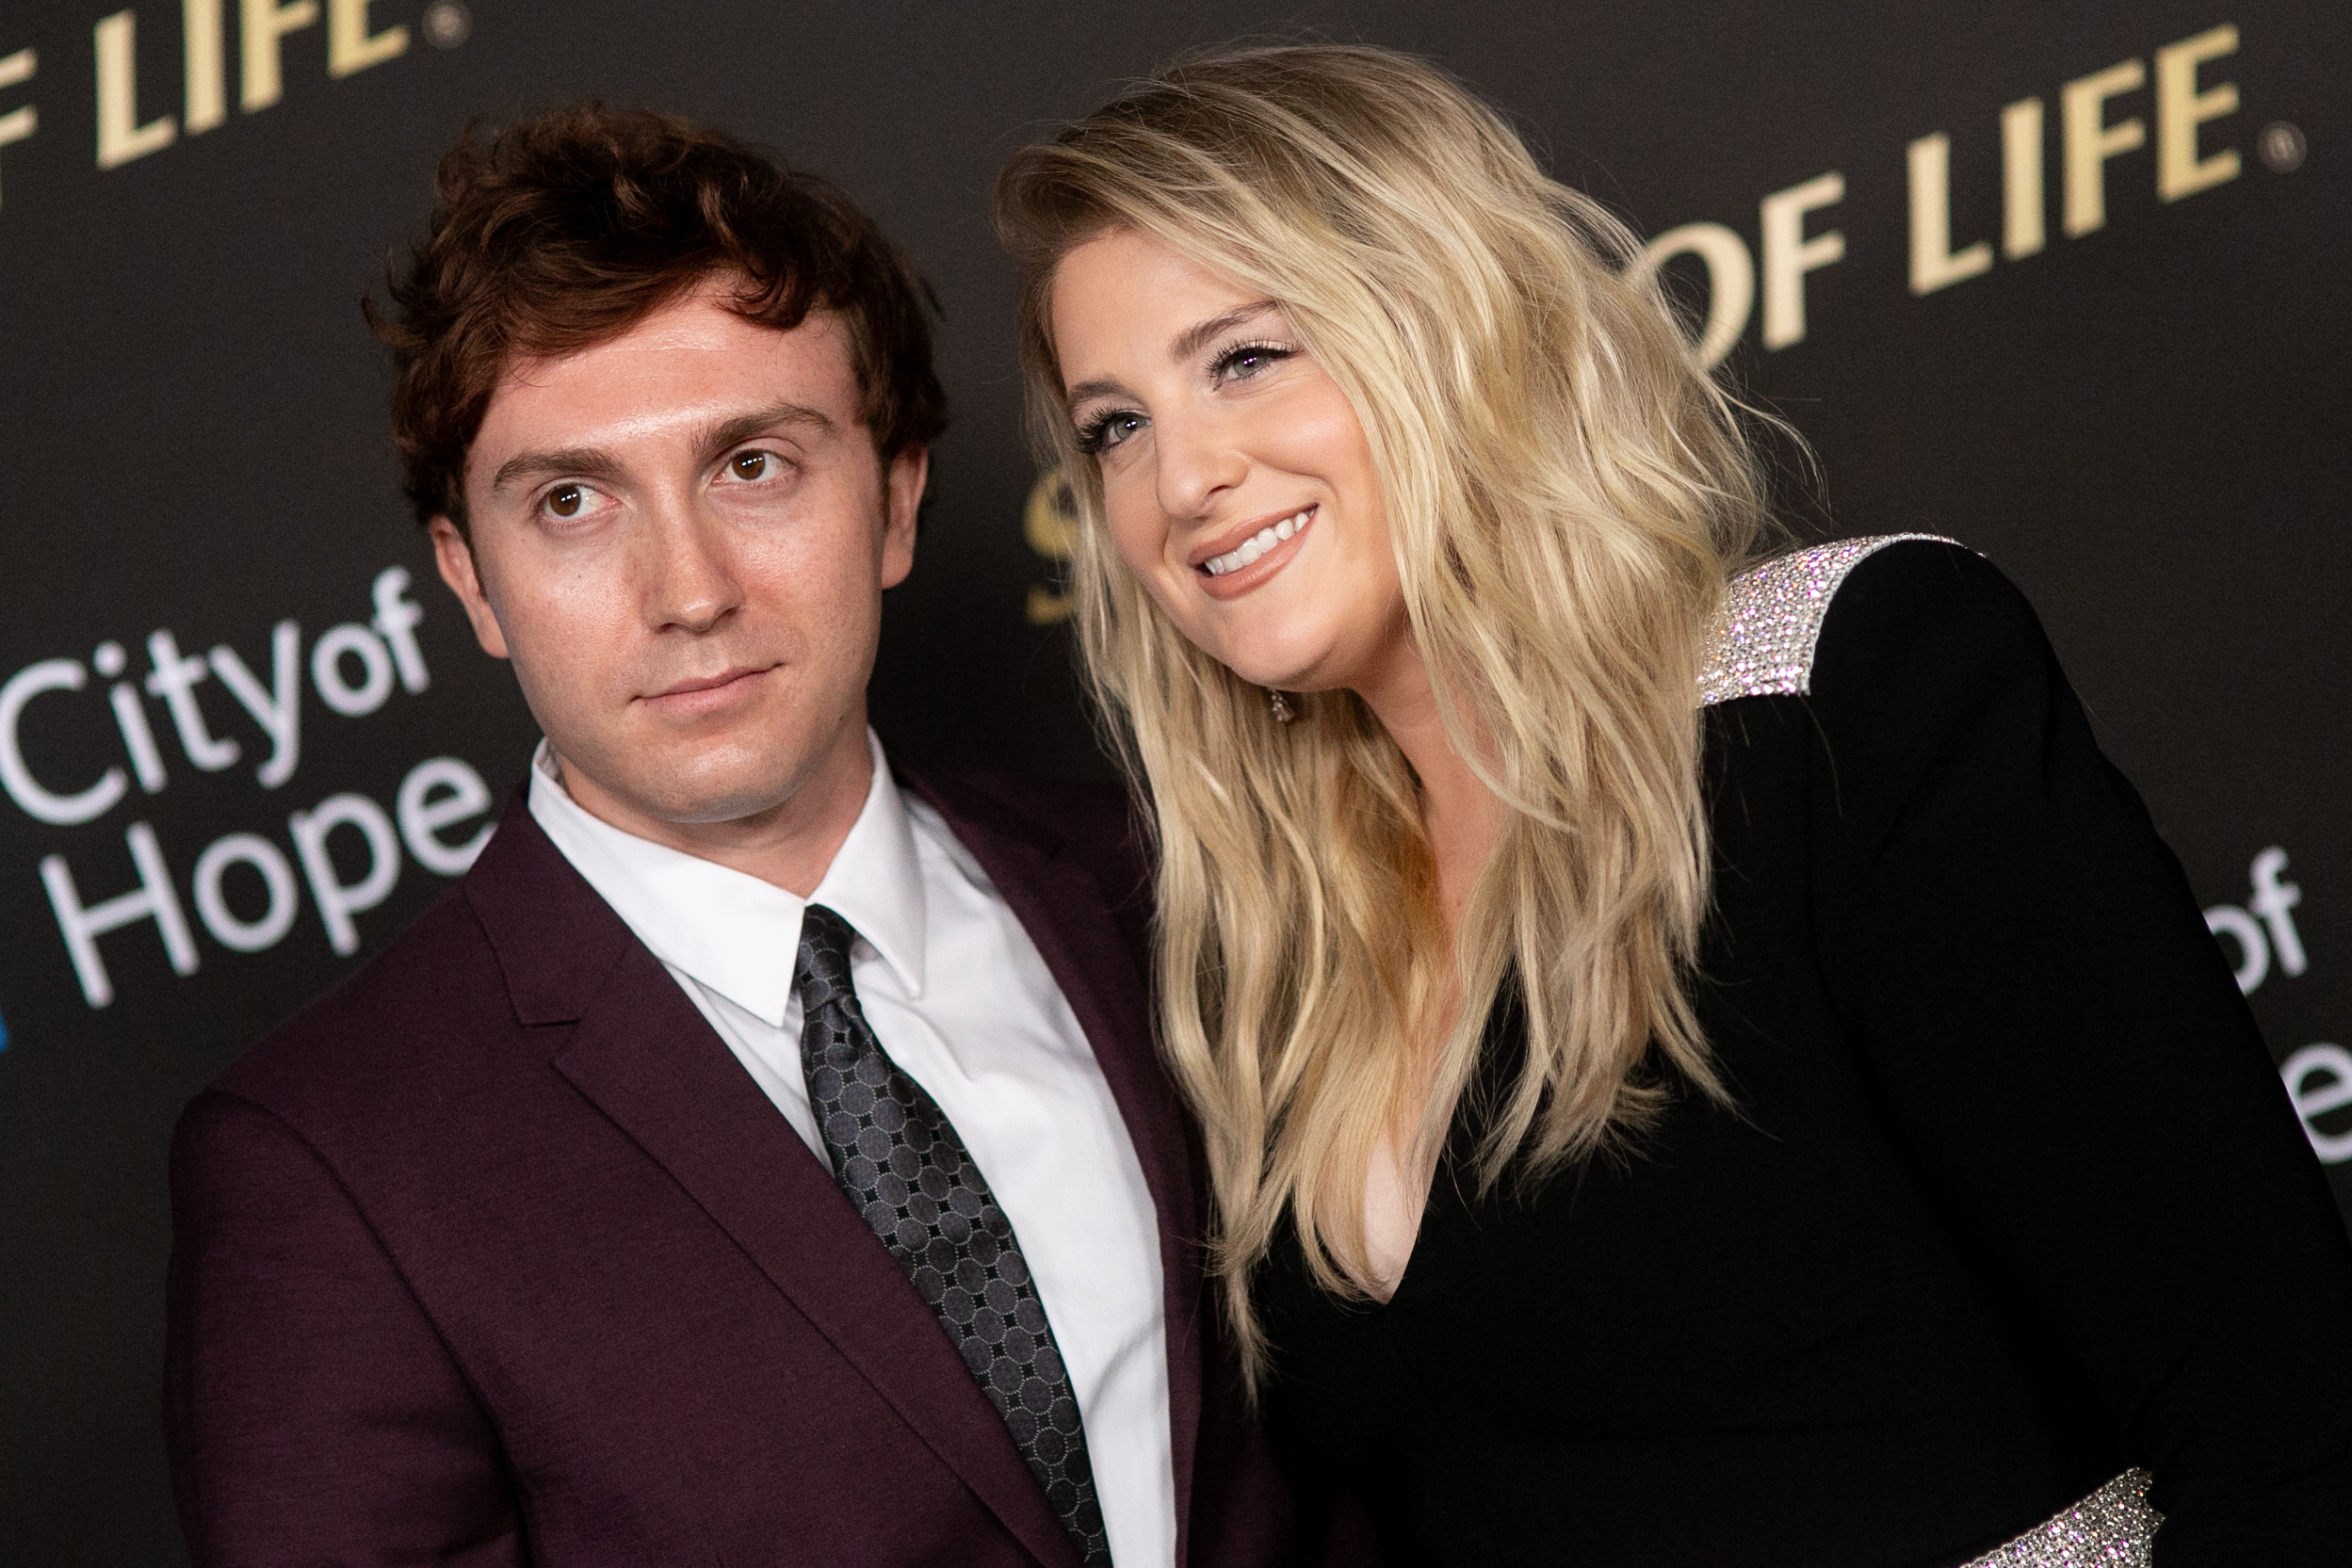 Meghan Trainor and Her Husband Poop Next to Each Other in Side-By